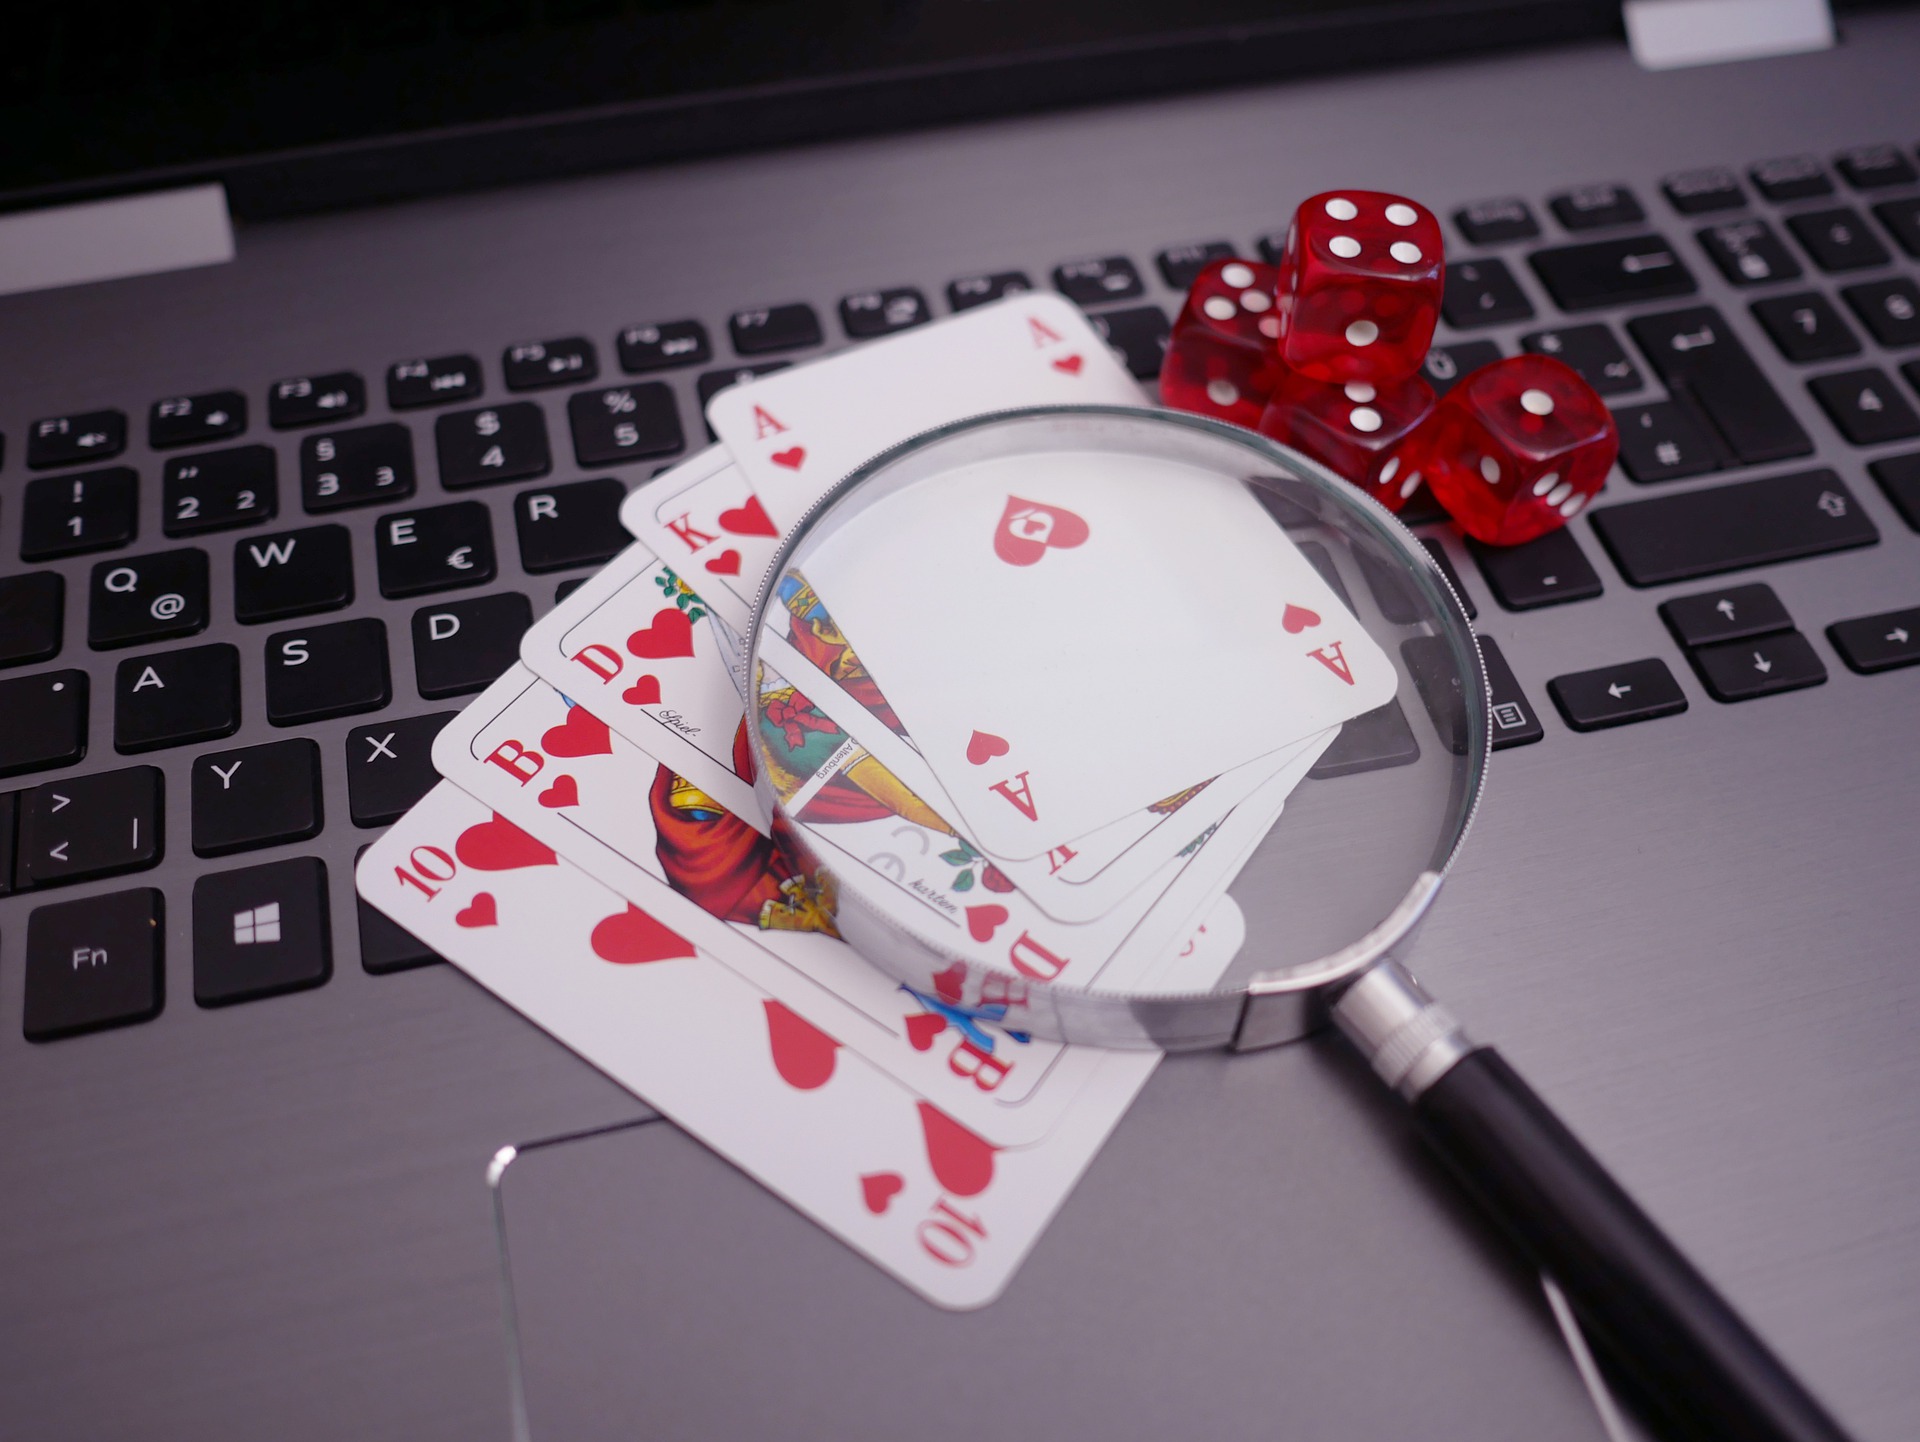 Three suggestions for new players at online casinos